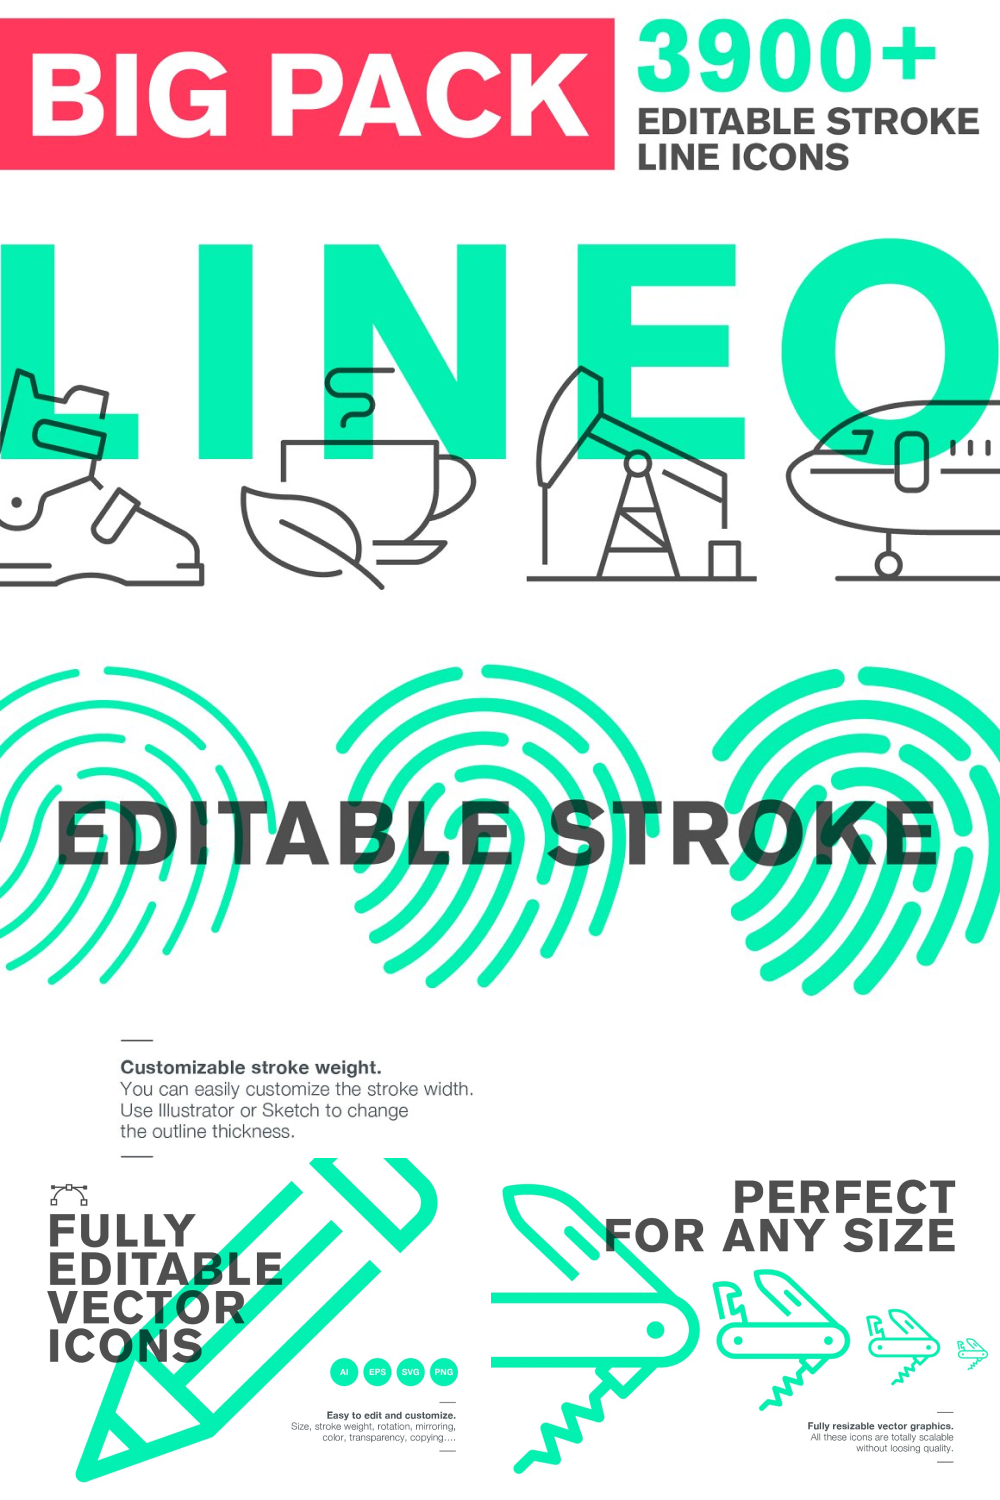 Lineo Big Pack - 3900+ Icons - Pinterest.